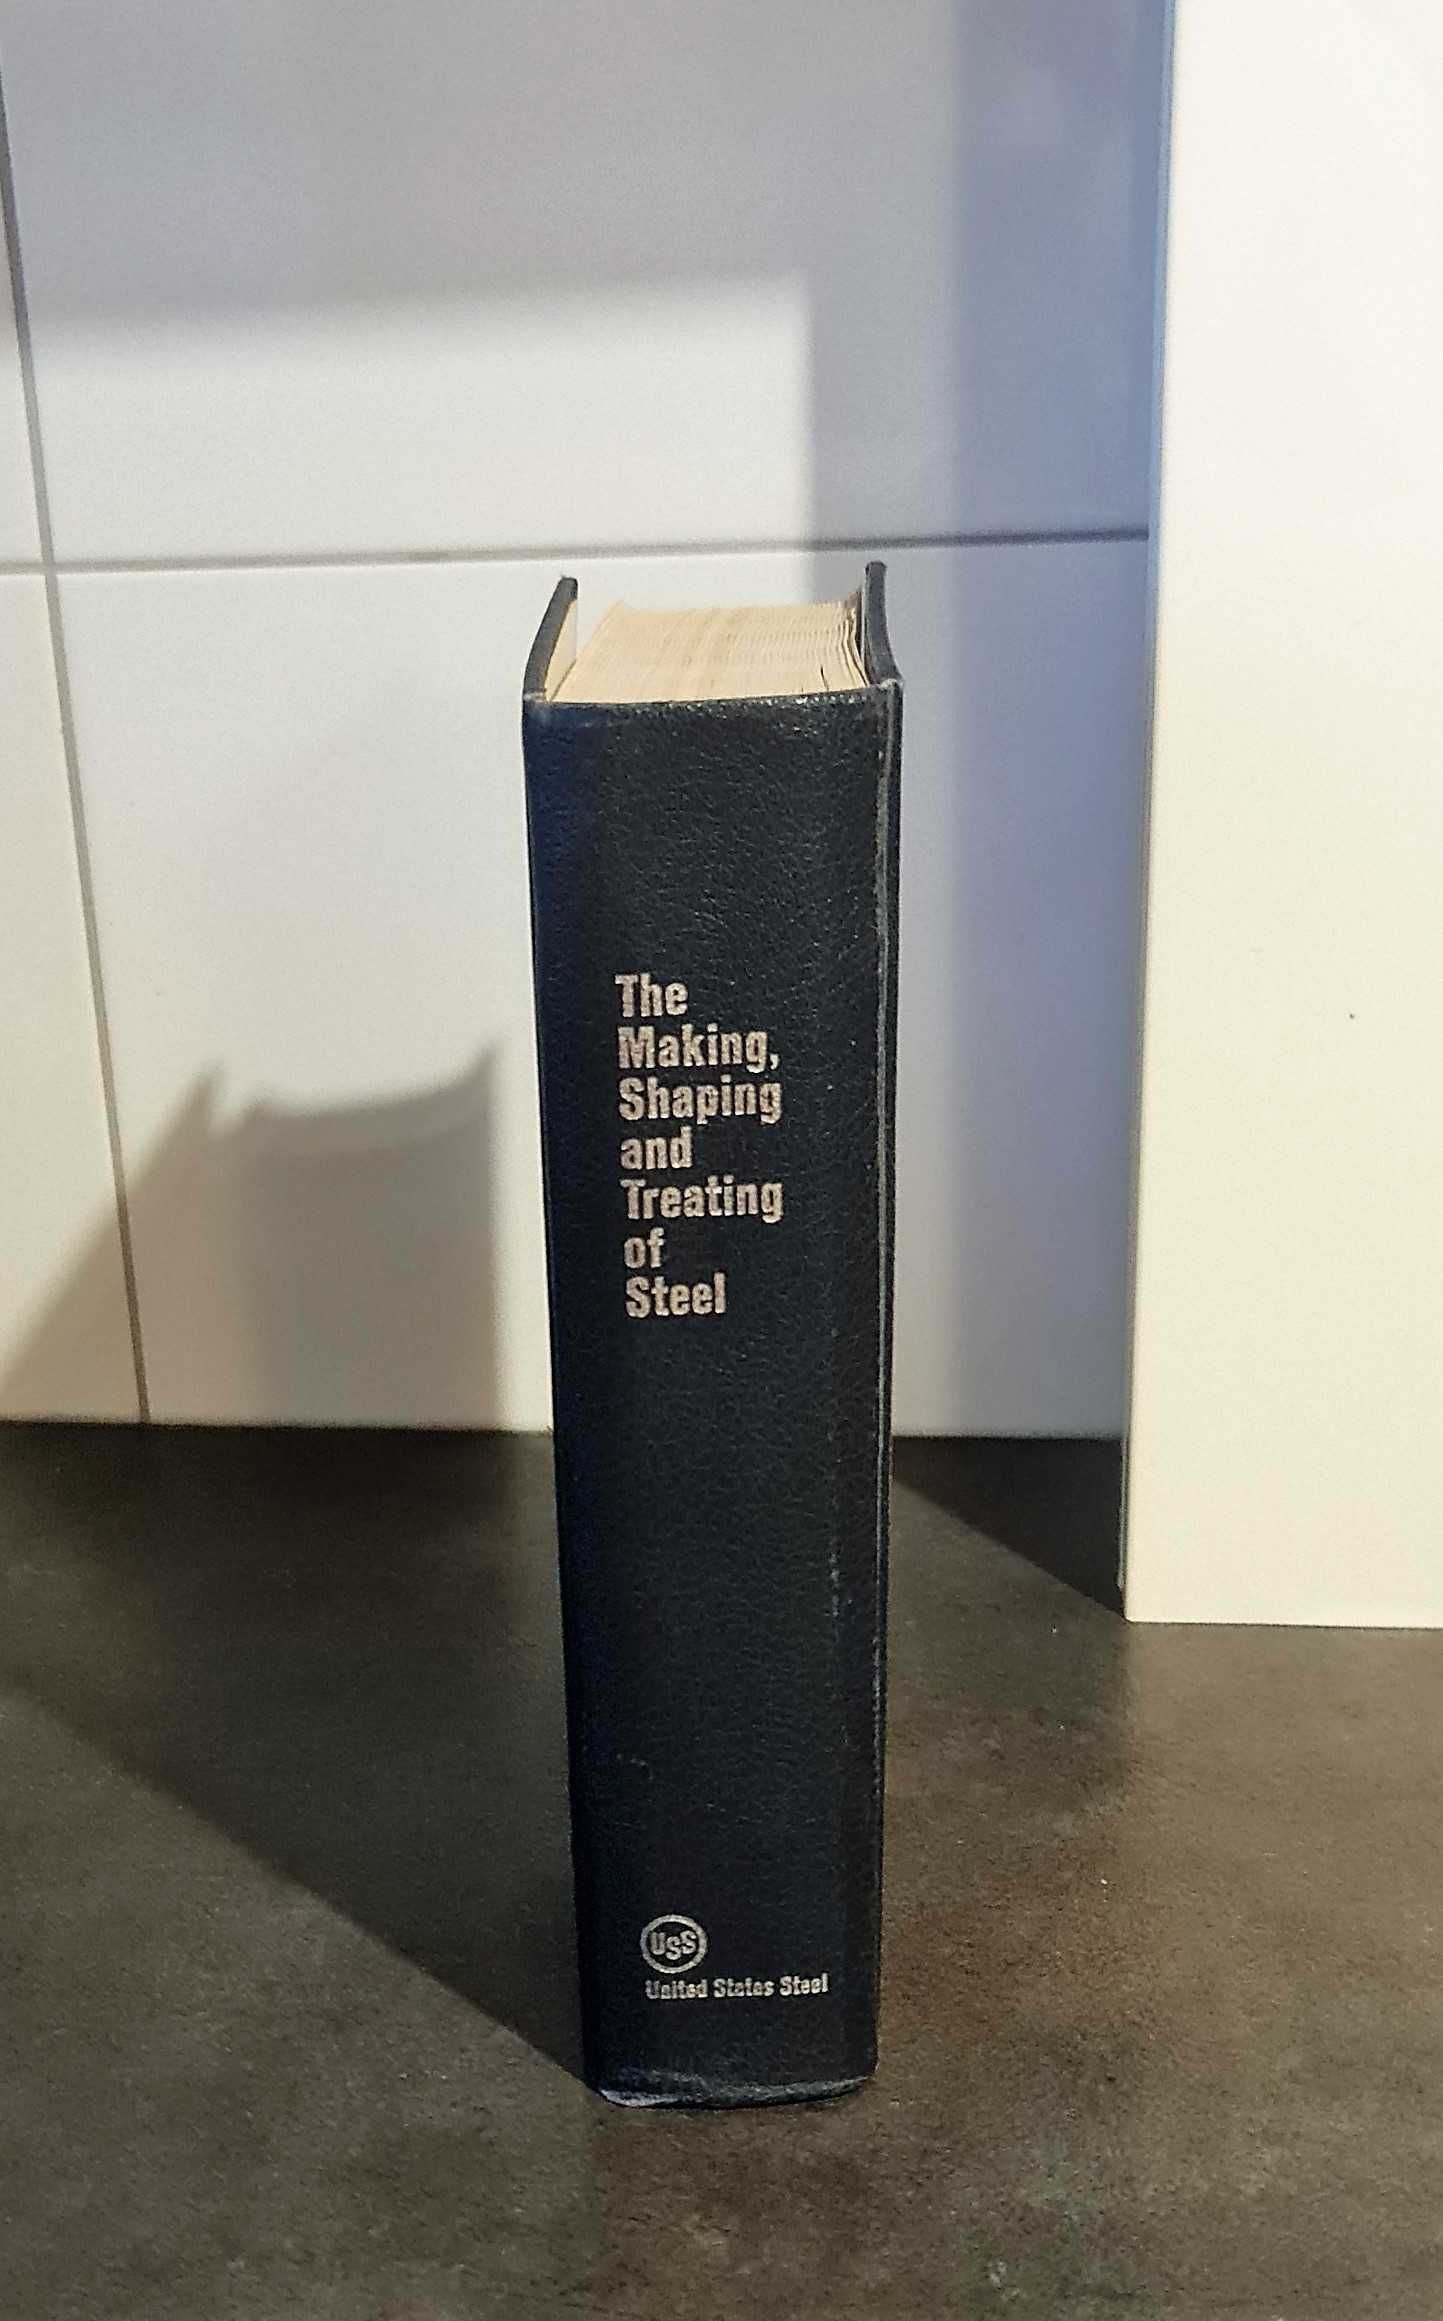 Harold E Mcgannon "The Making, Shaping and Treating of Steel"